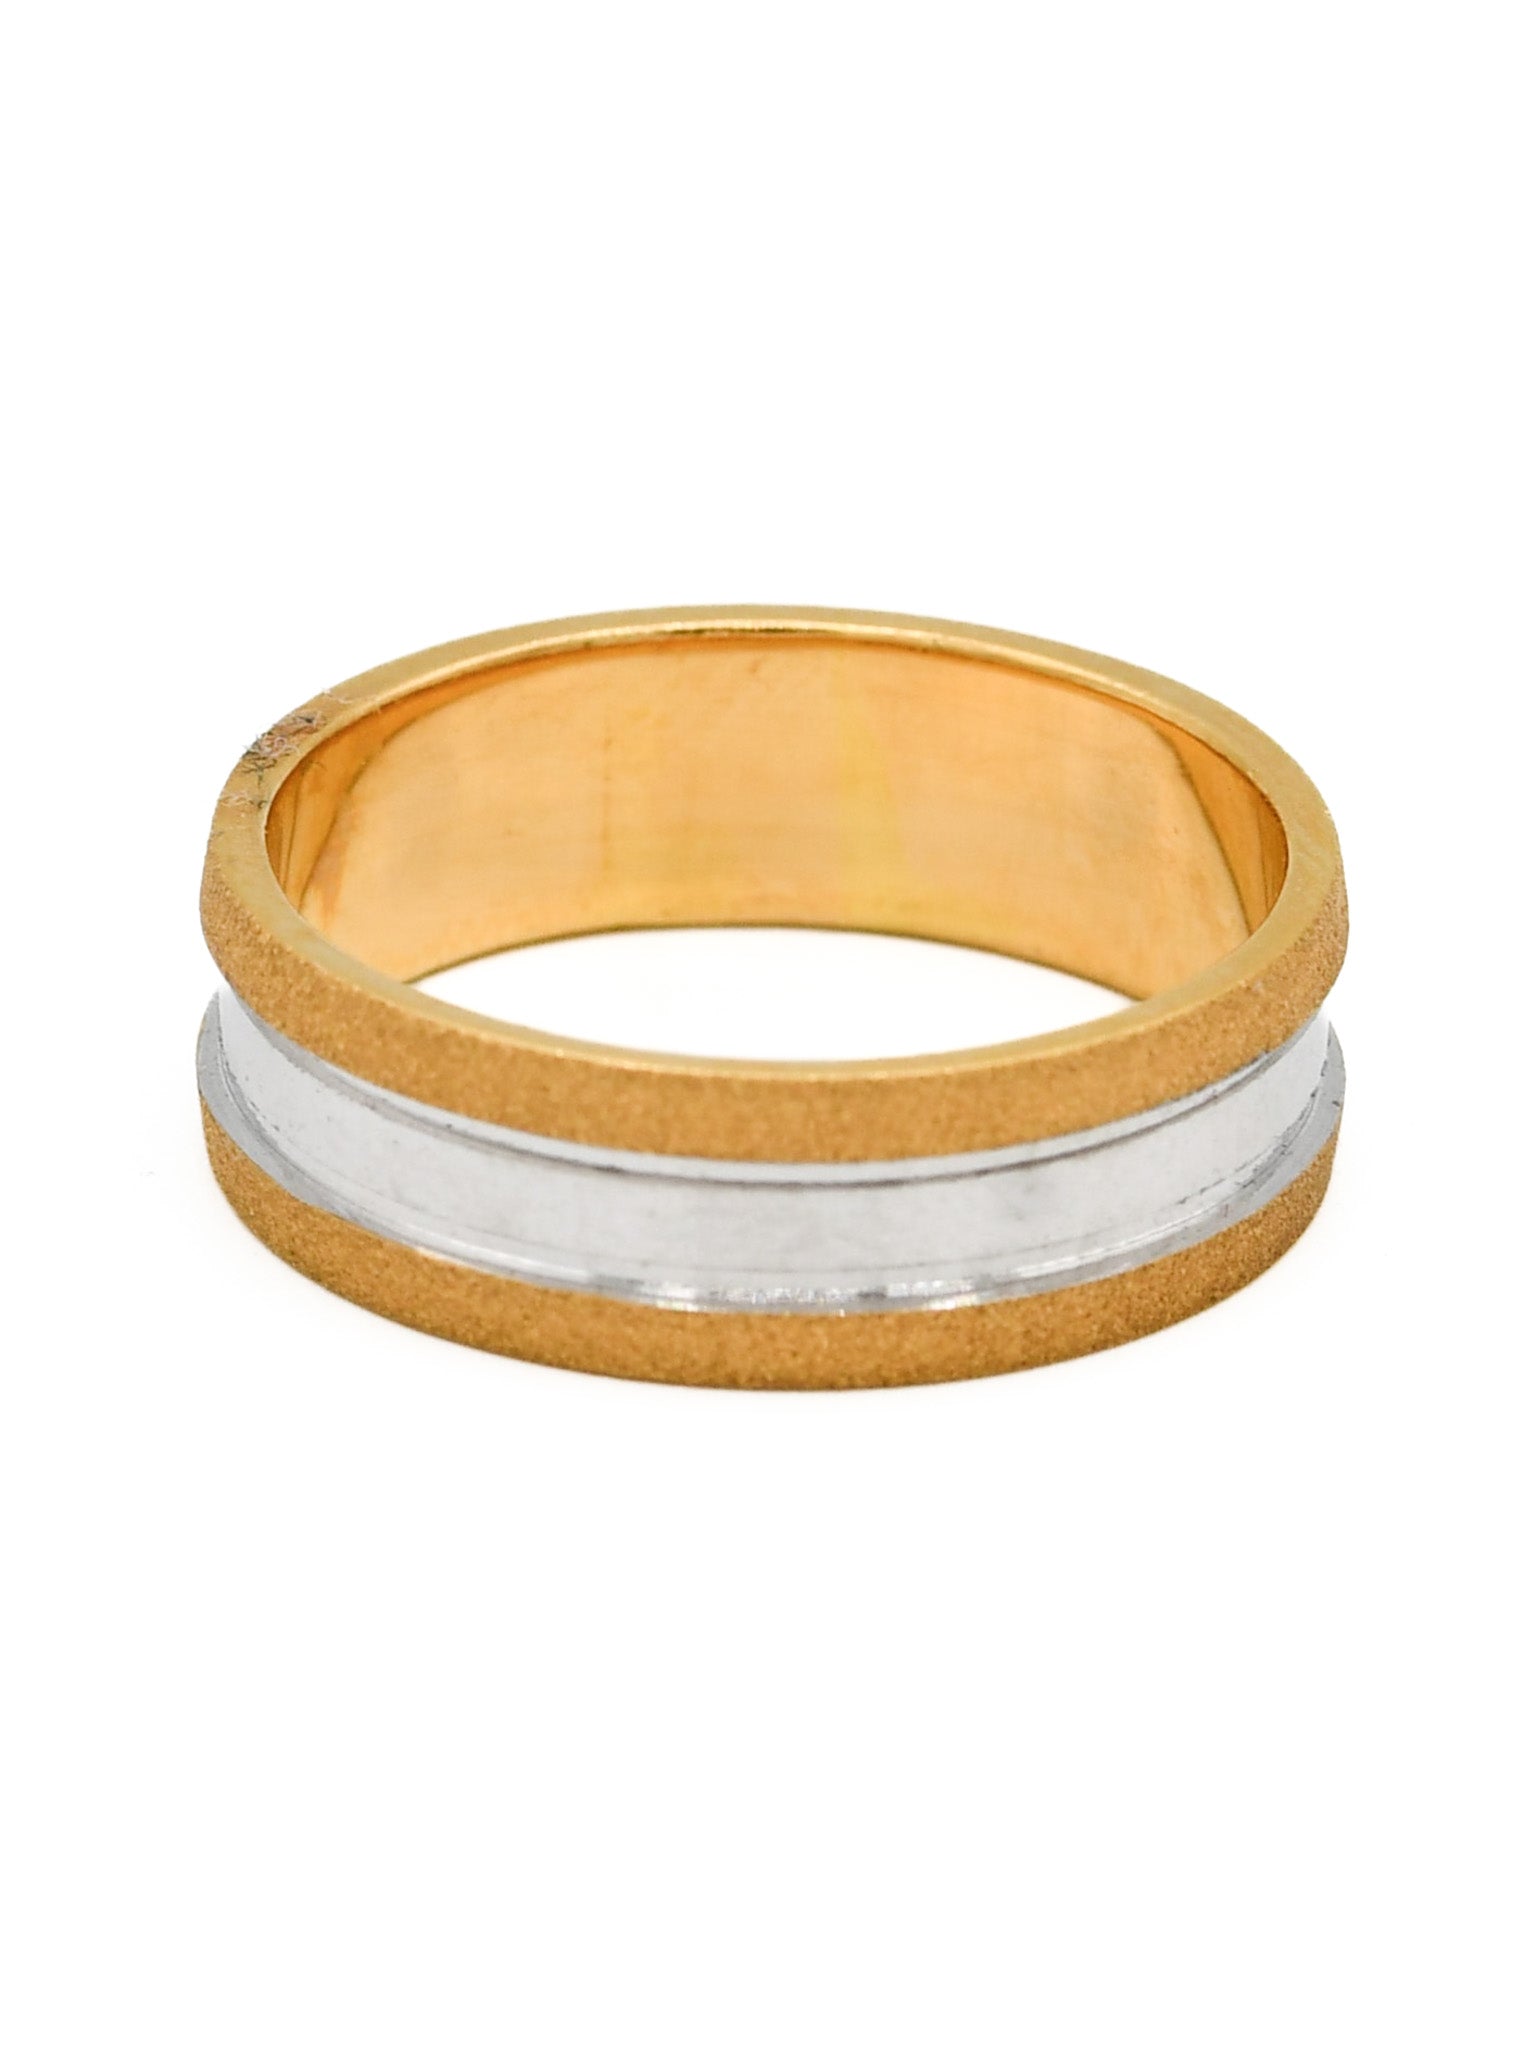 22ct Gold Two Tone Band Ring - Roop Darshan